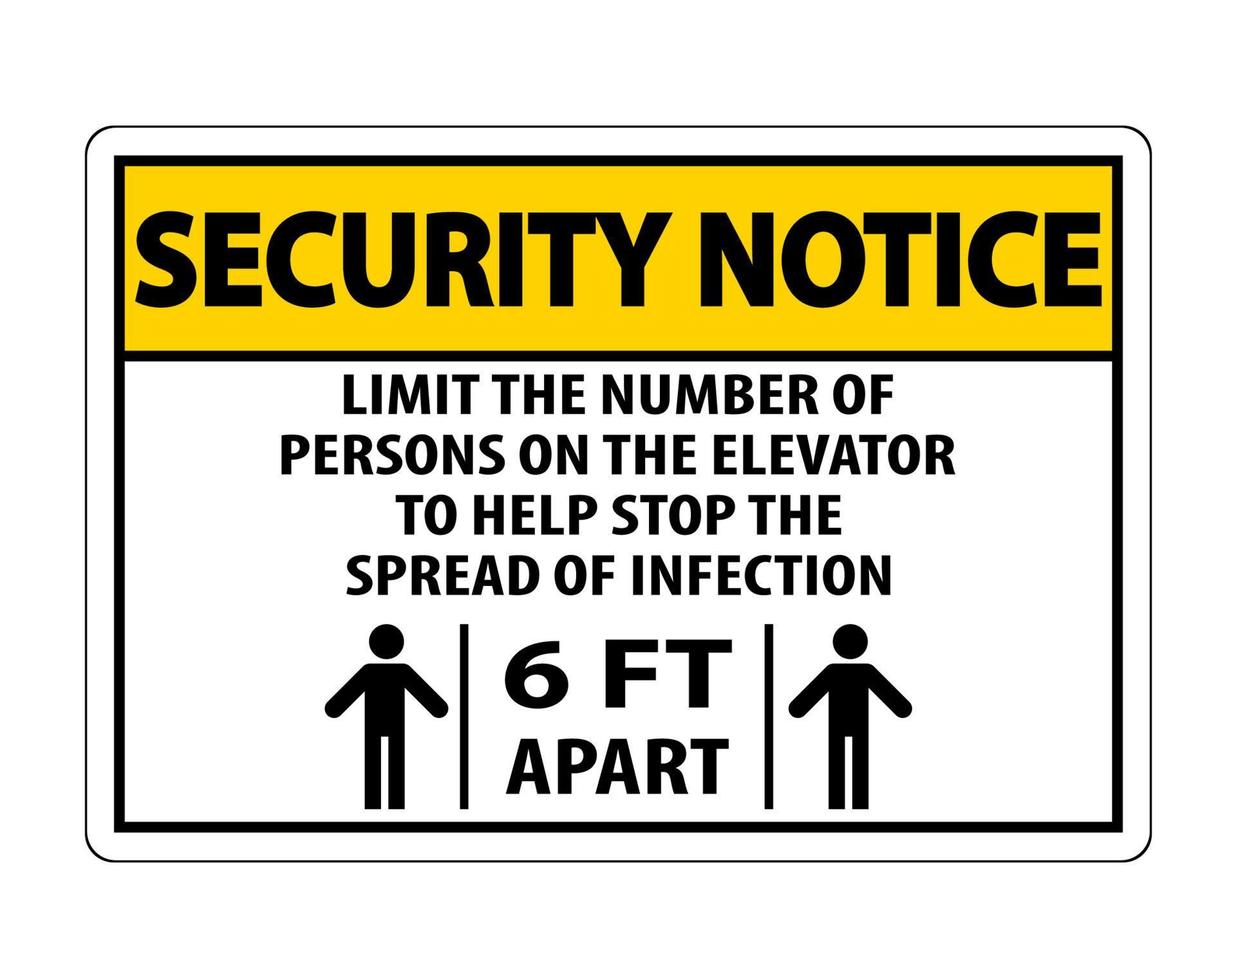 Security Notice Elevator Physical Distancing Sign Isolate On White Background,Vector Illustration EPS.10 vector